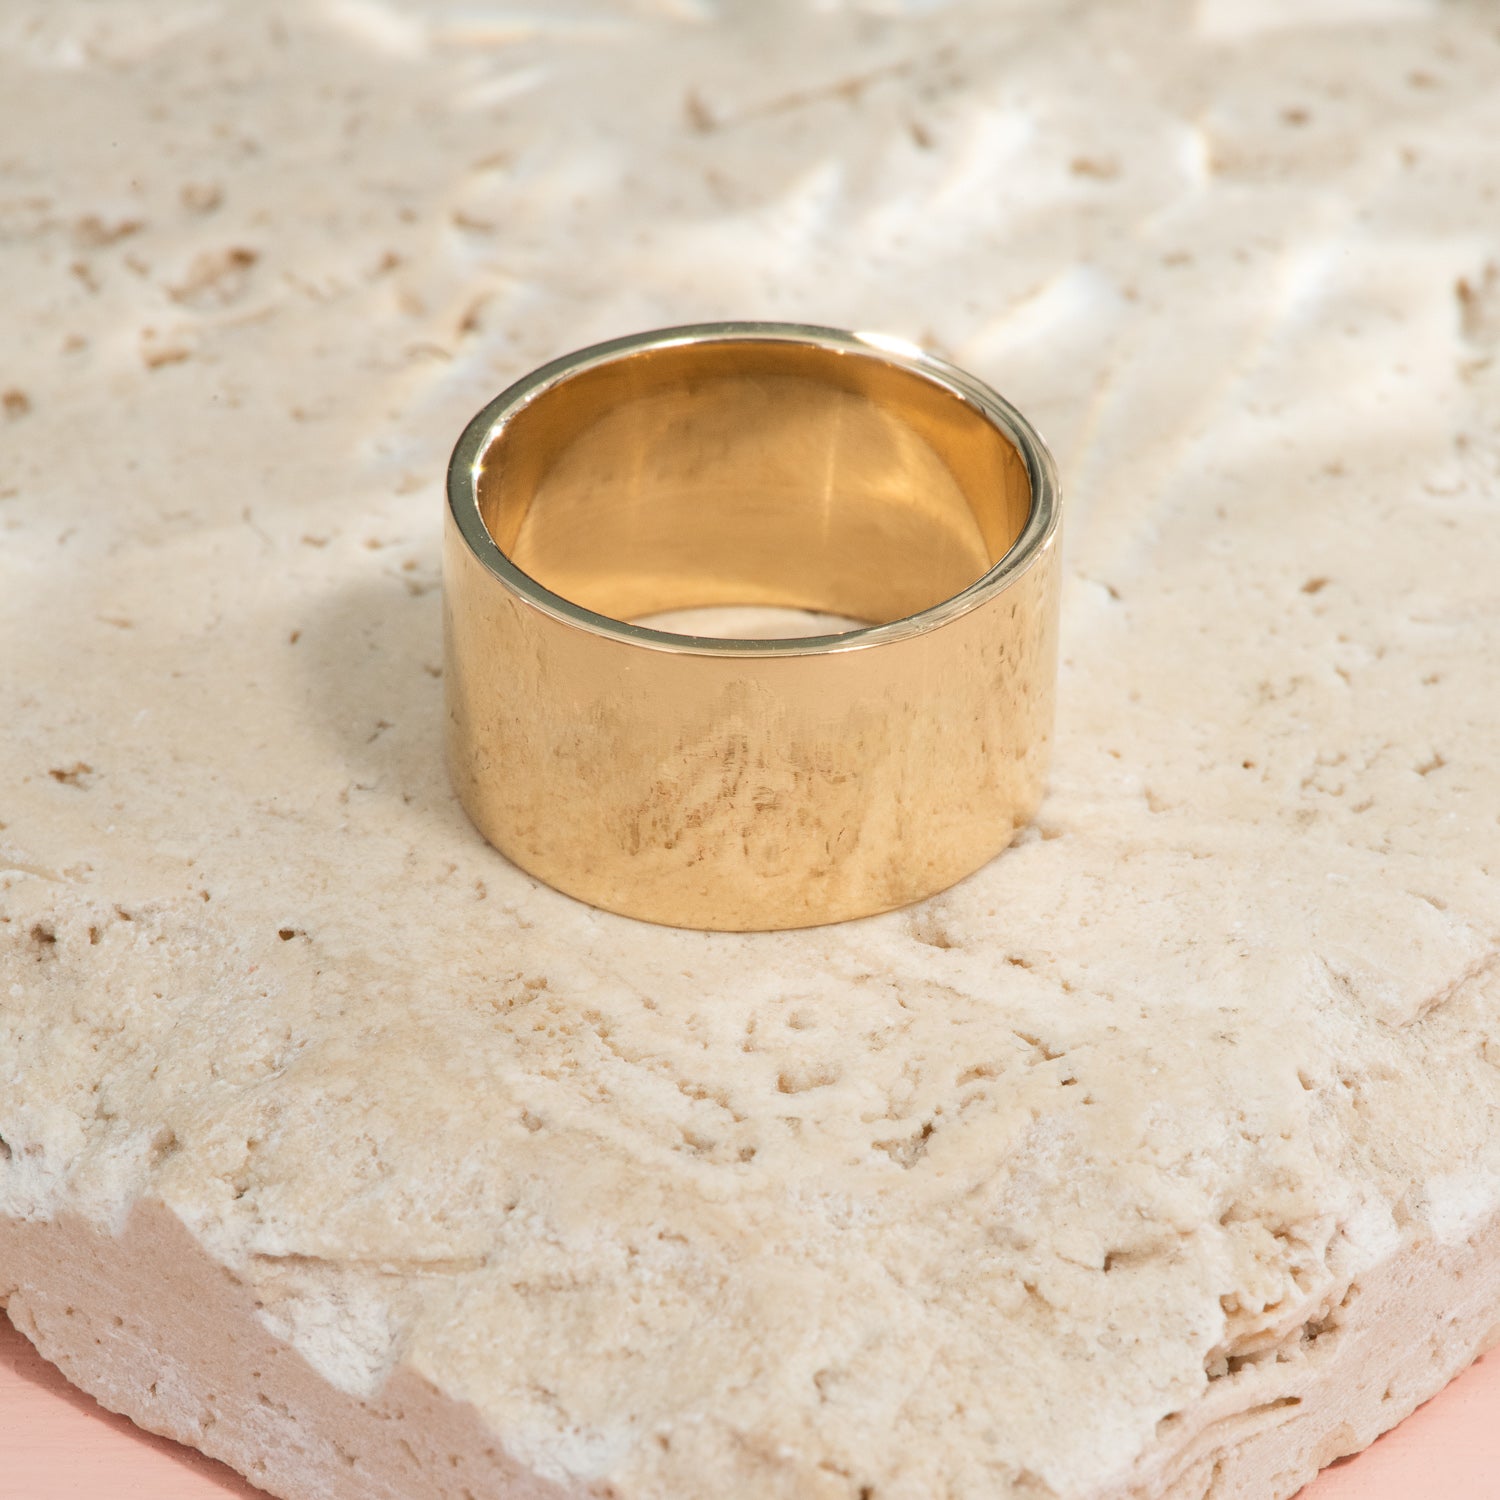 A wide, flat, high polish ring of yellow gold.